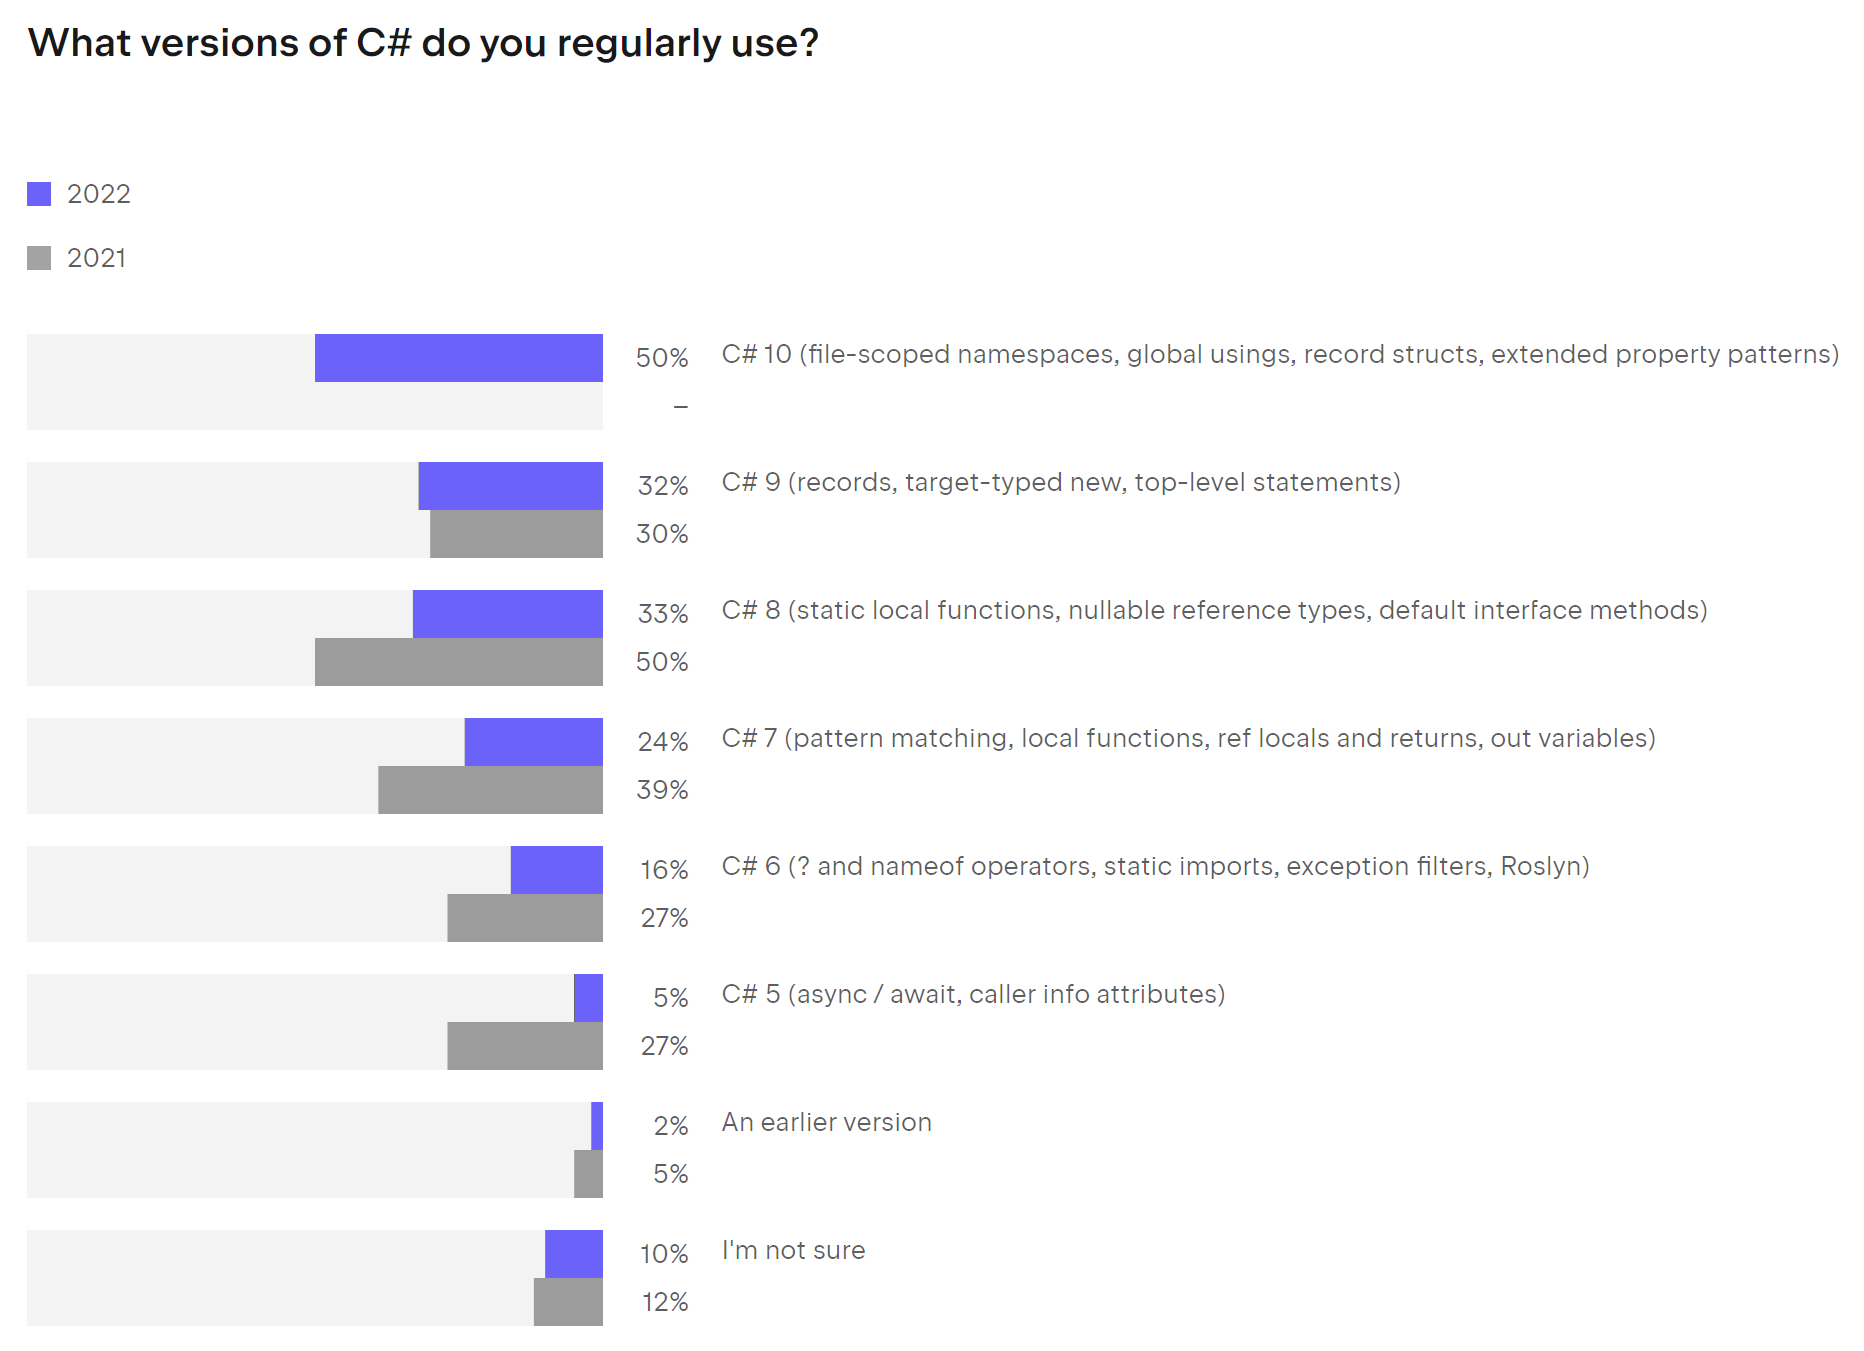 Image shows survey results to the question: What versions of C# do you regularly use.